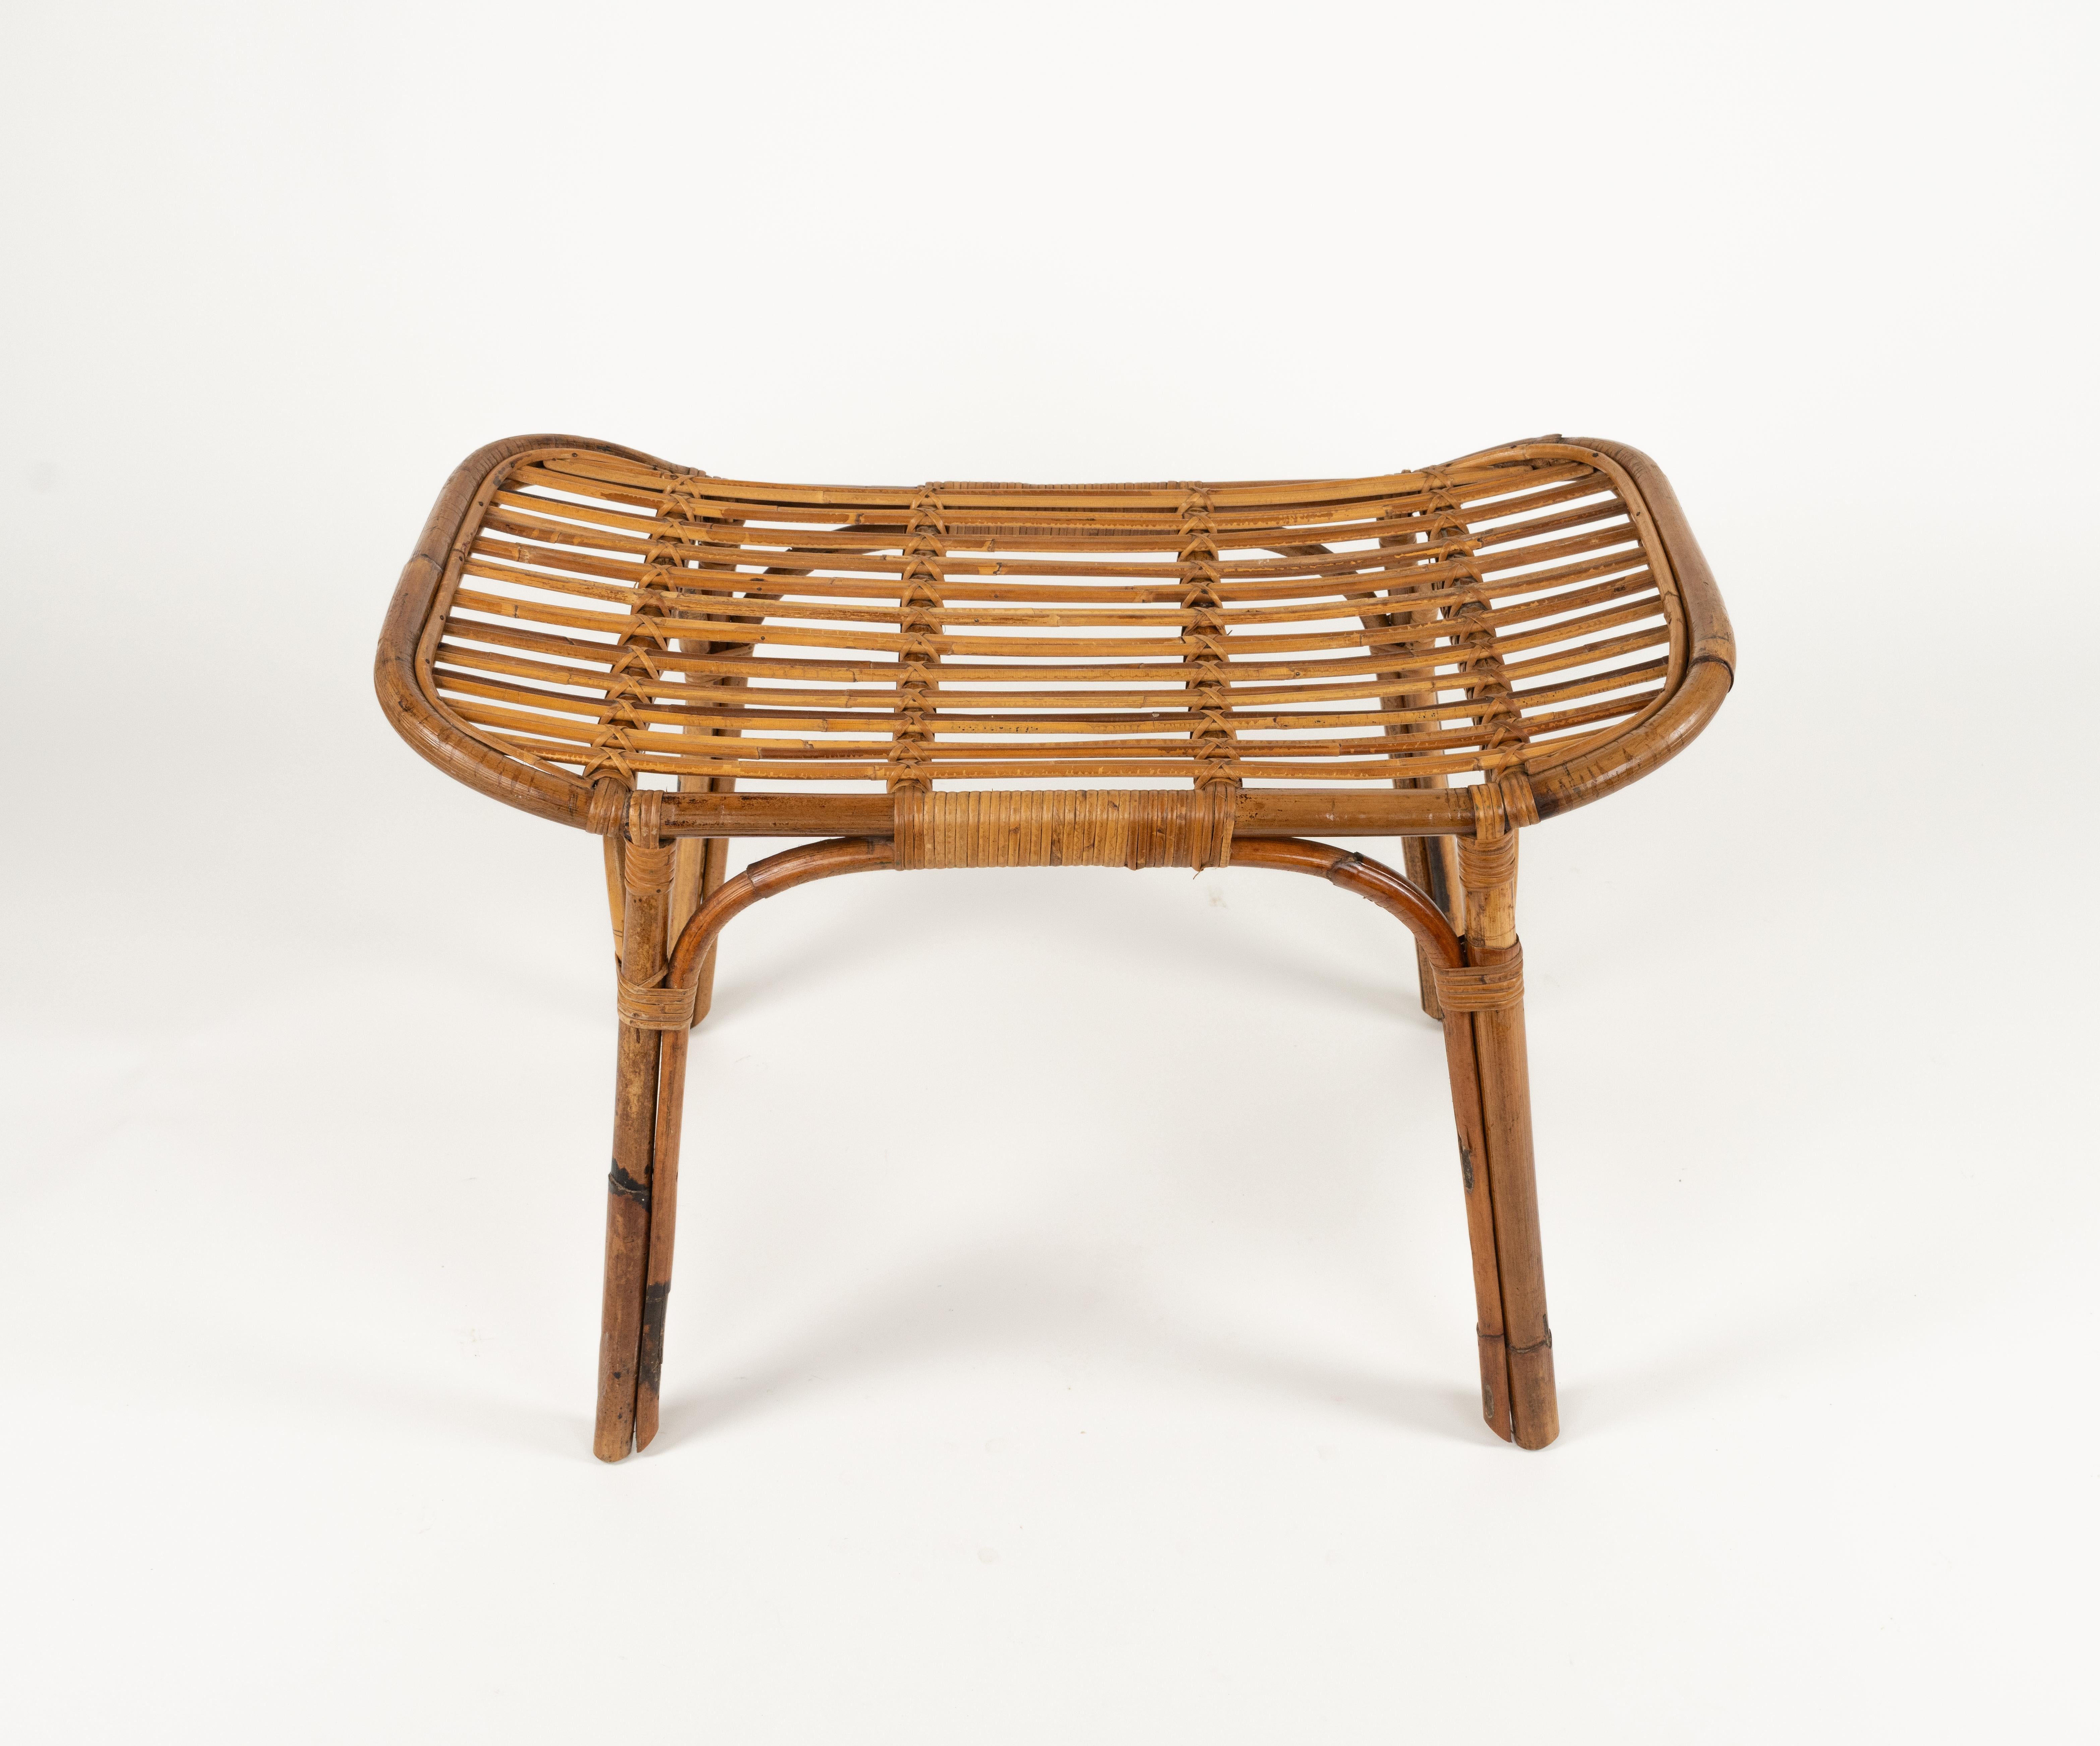 Midcentury Bench or Side Table in Rattan & Bamboo Tito Agnoli Style, Italy 1960s For Sale 6